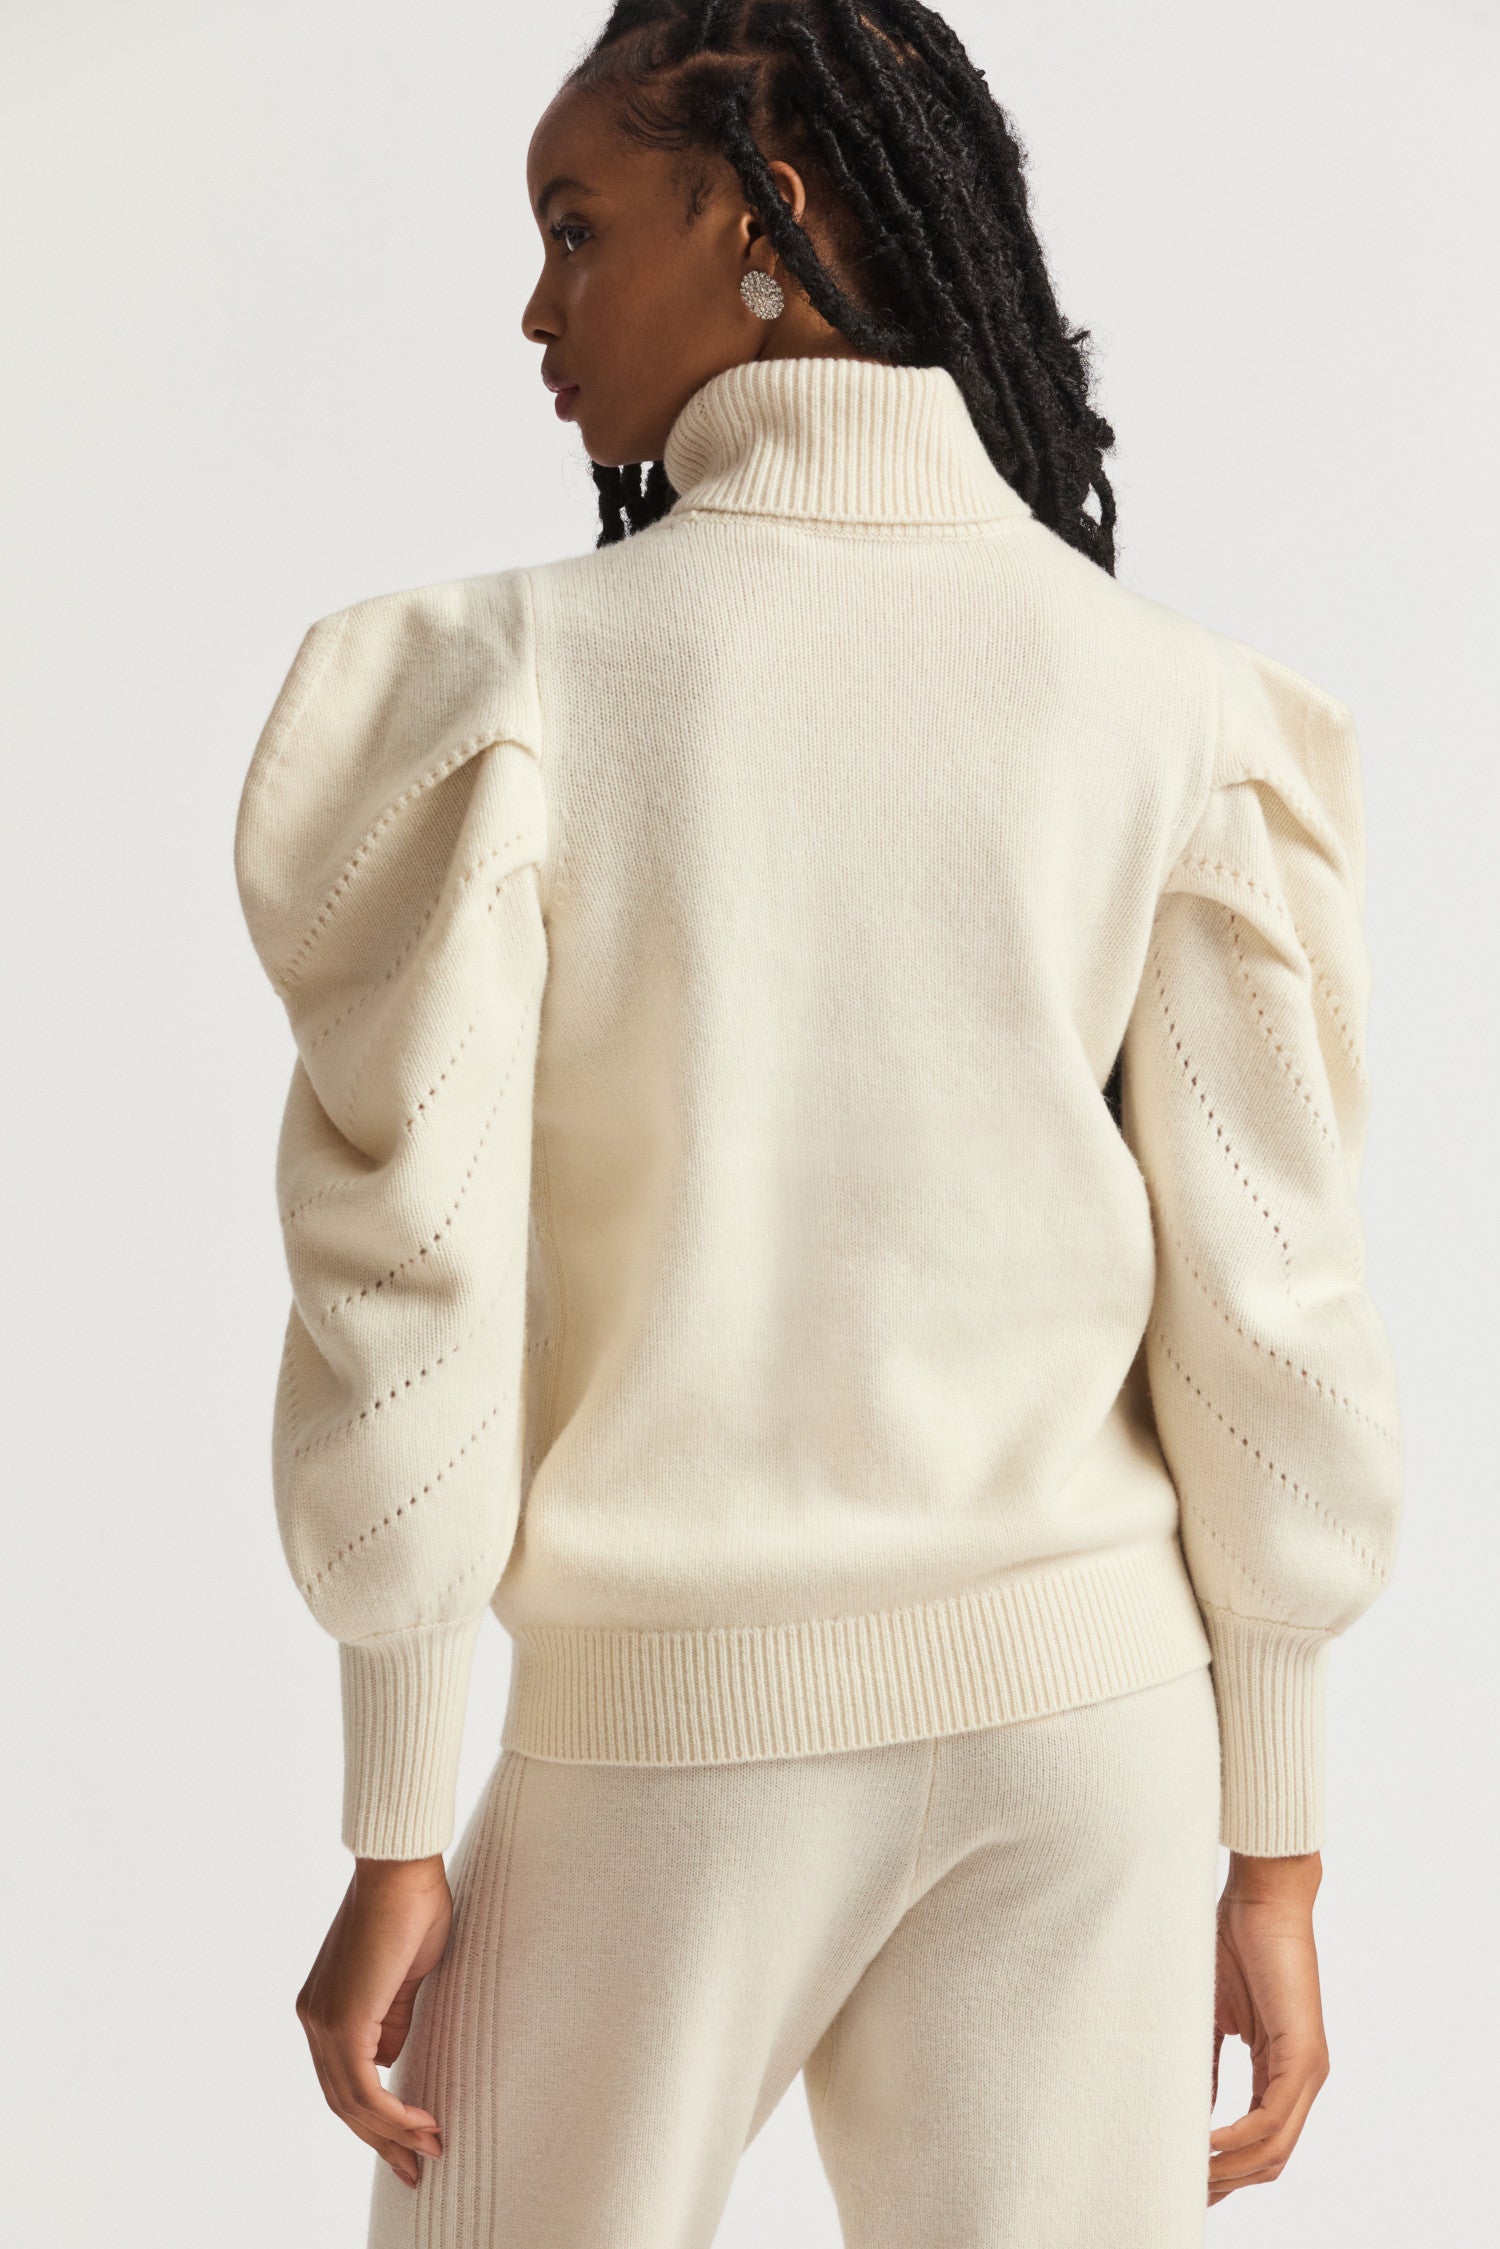 Cream sweater turtleneck in a wool cashmere fabric.  With angel chevron pointelle detailing on the front and pleated Victorian-inspired sleeves with a high cuff.